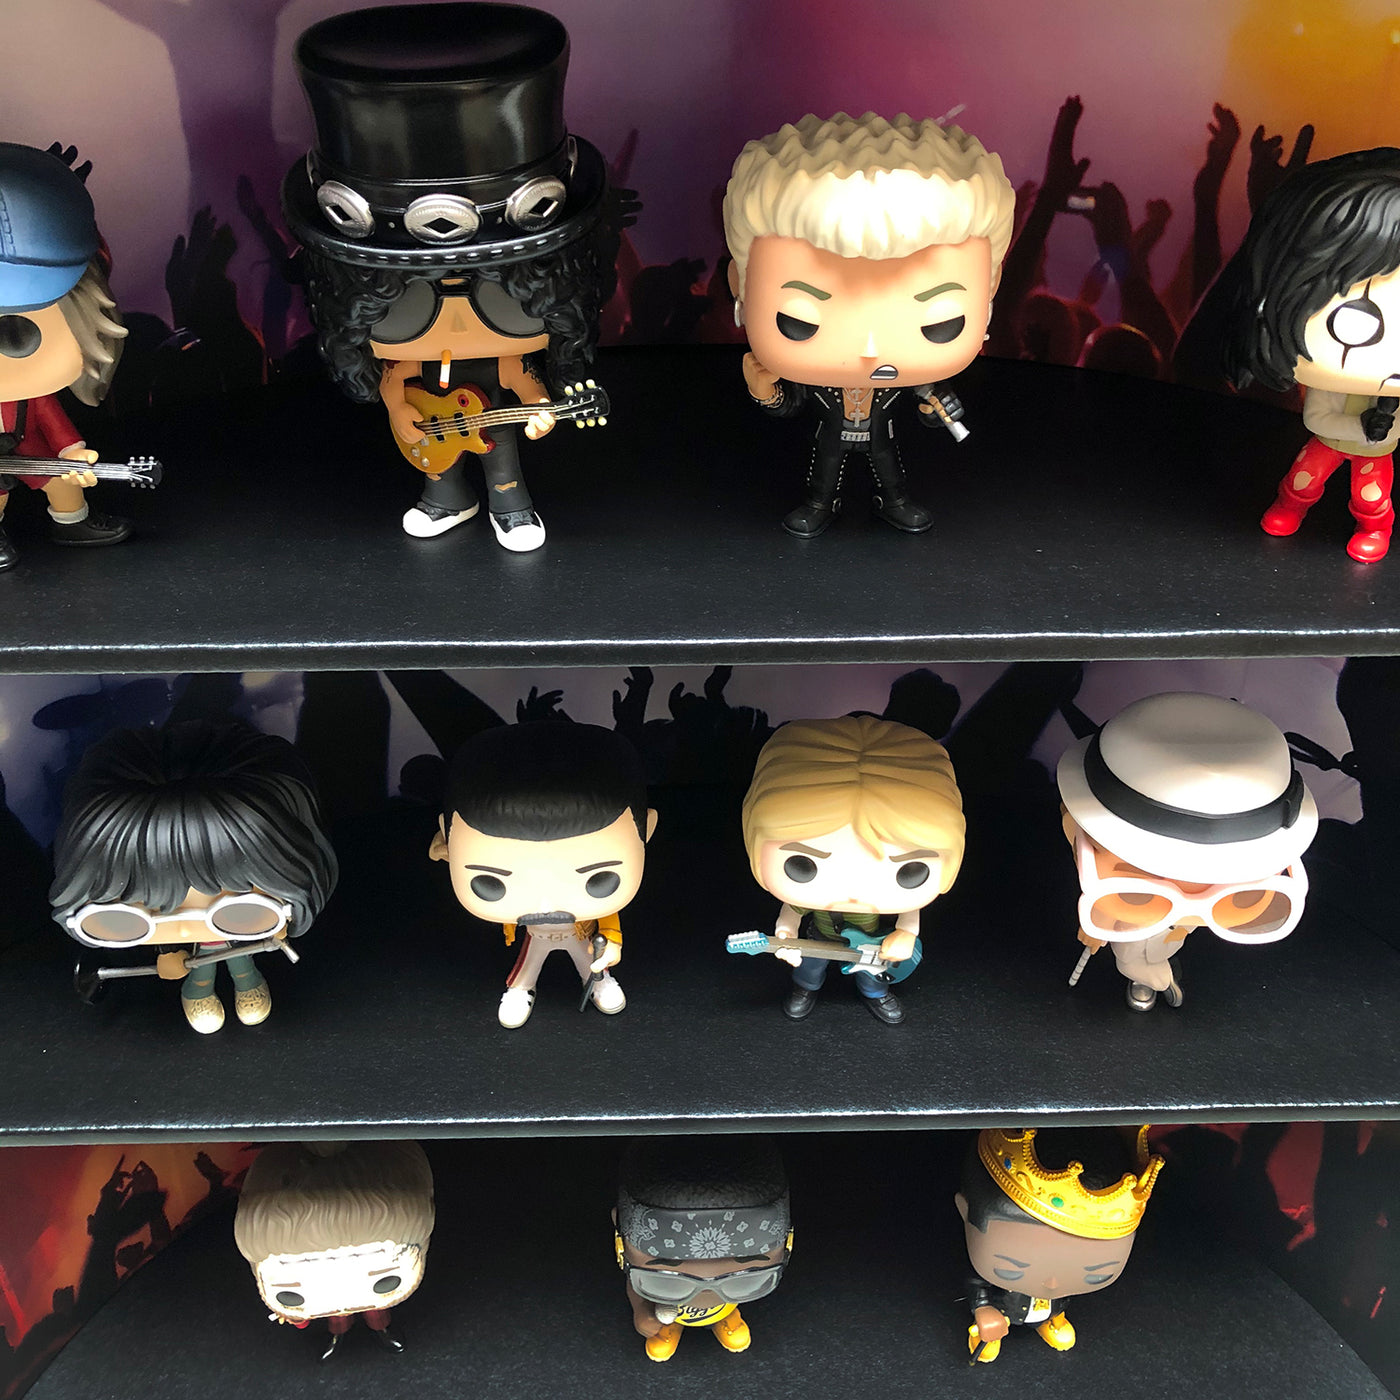 **BACK IN STOCK MAY 13TH** ROCK CONCERT - Display Case for Funko Pops with 3 Backdrop Inserts, Corrugated Cardboard - Display Geek